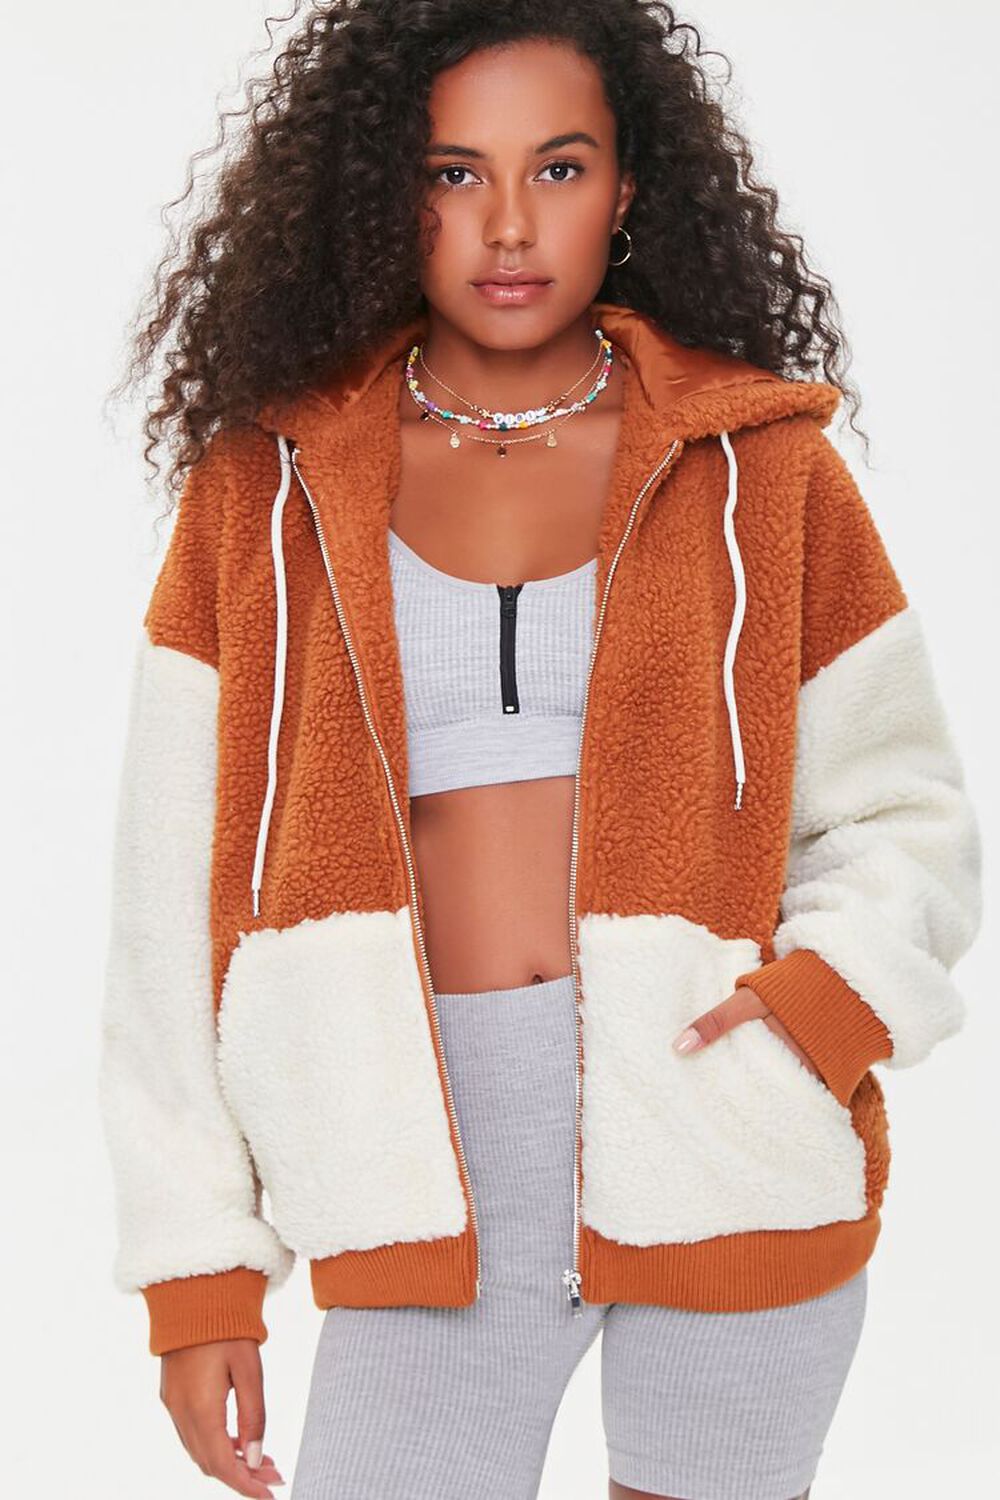 RUST/CREAM Colorblock Faux Shearling Hooded Jacket, image 1